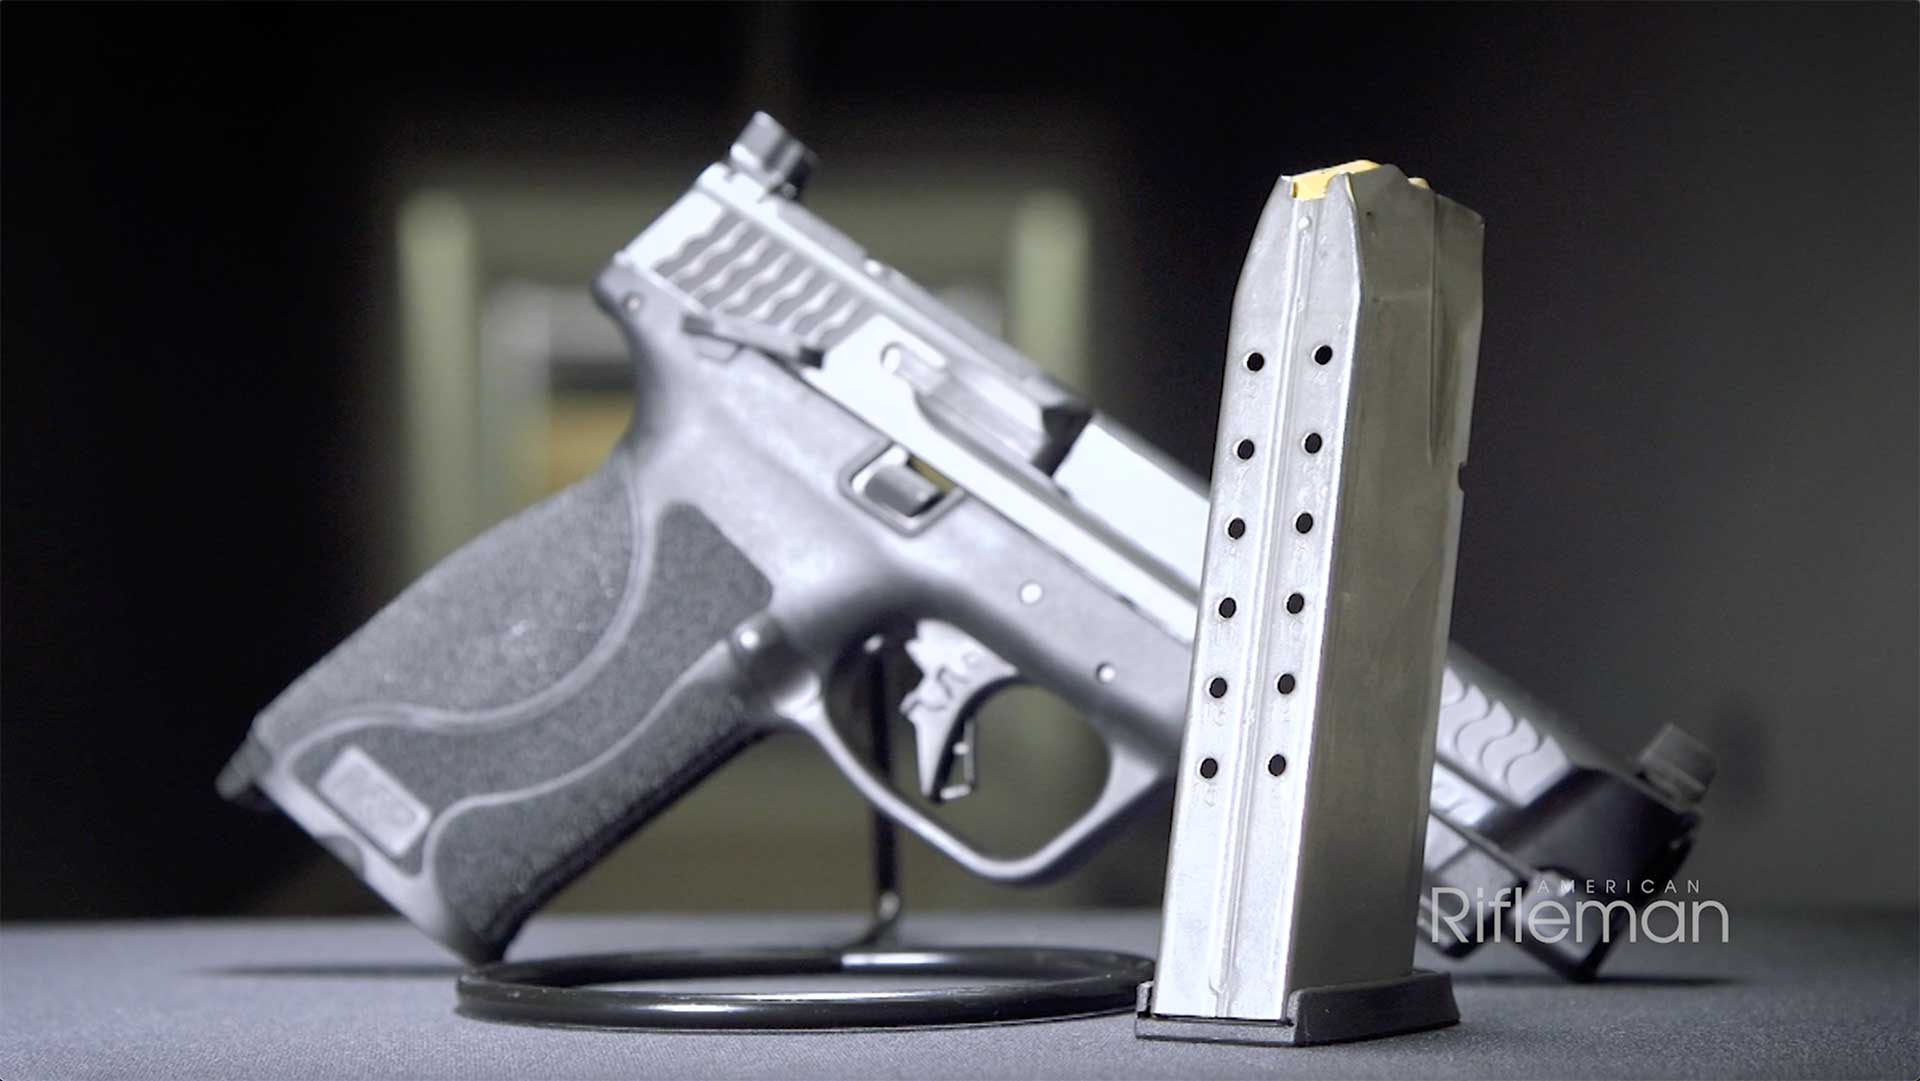 A 15-round magazine stands in front of the M&P 10mm M2.0 pistol.